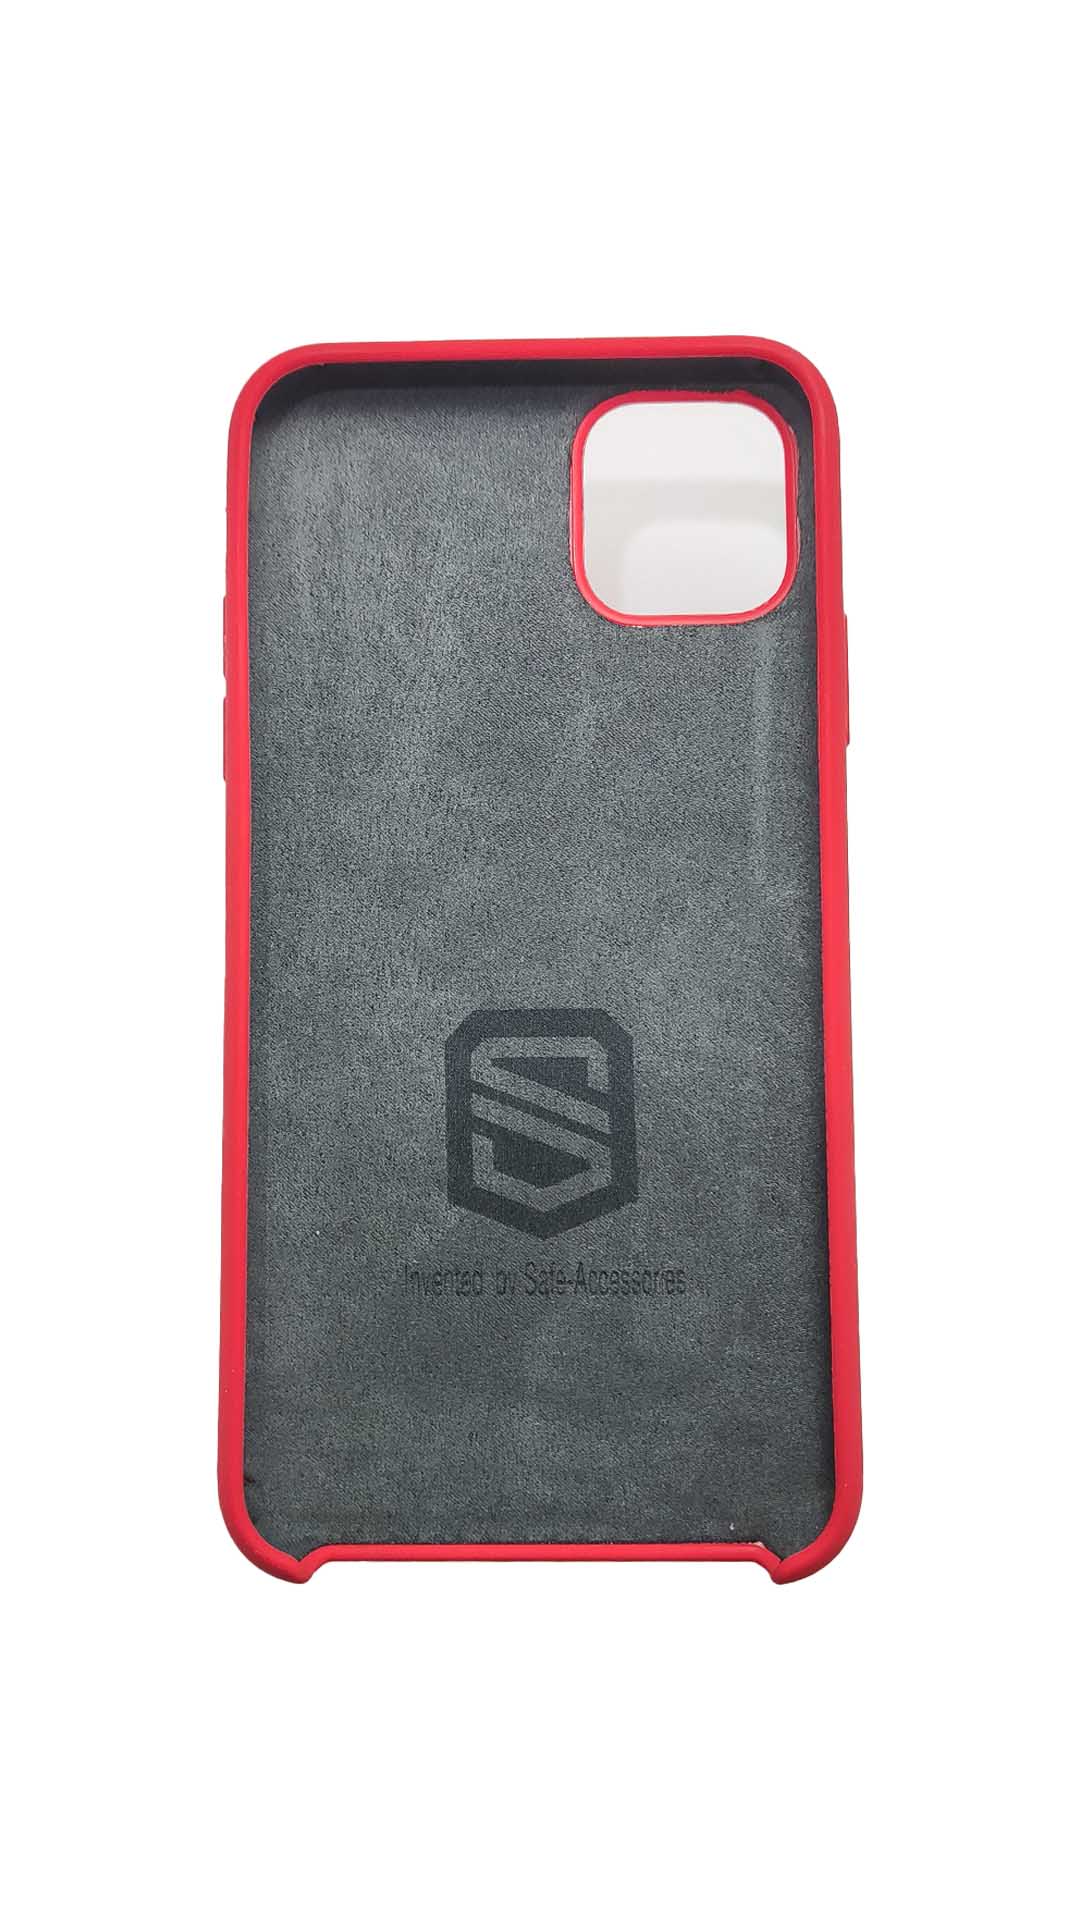 Inside view of Safe-Case for iPhone 11 Pro Max with Anti-radiation EMF protection